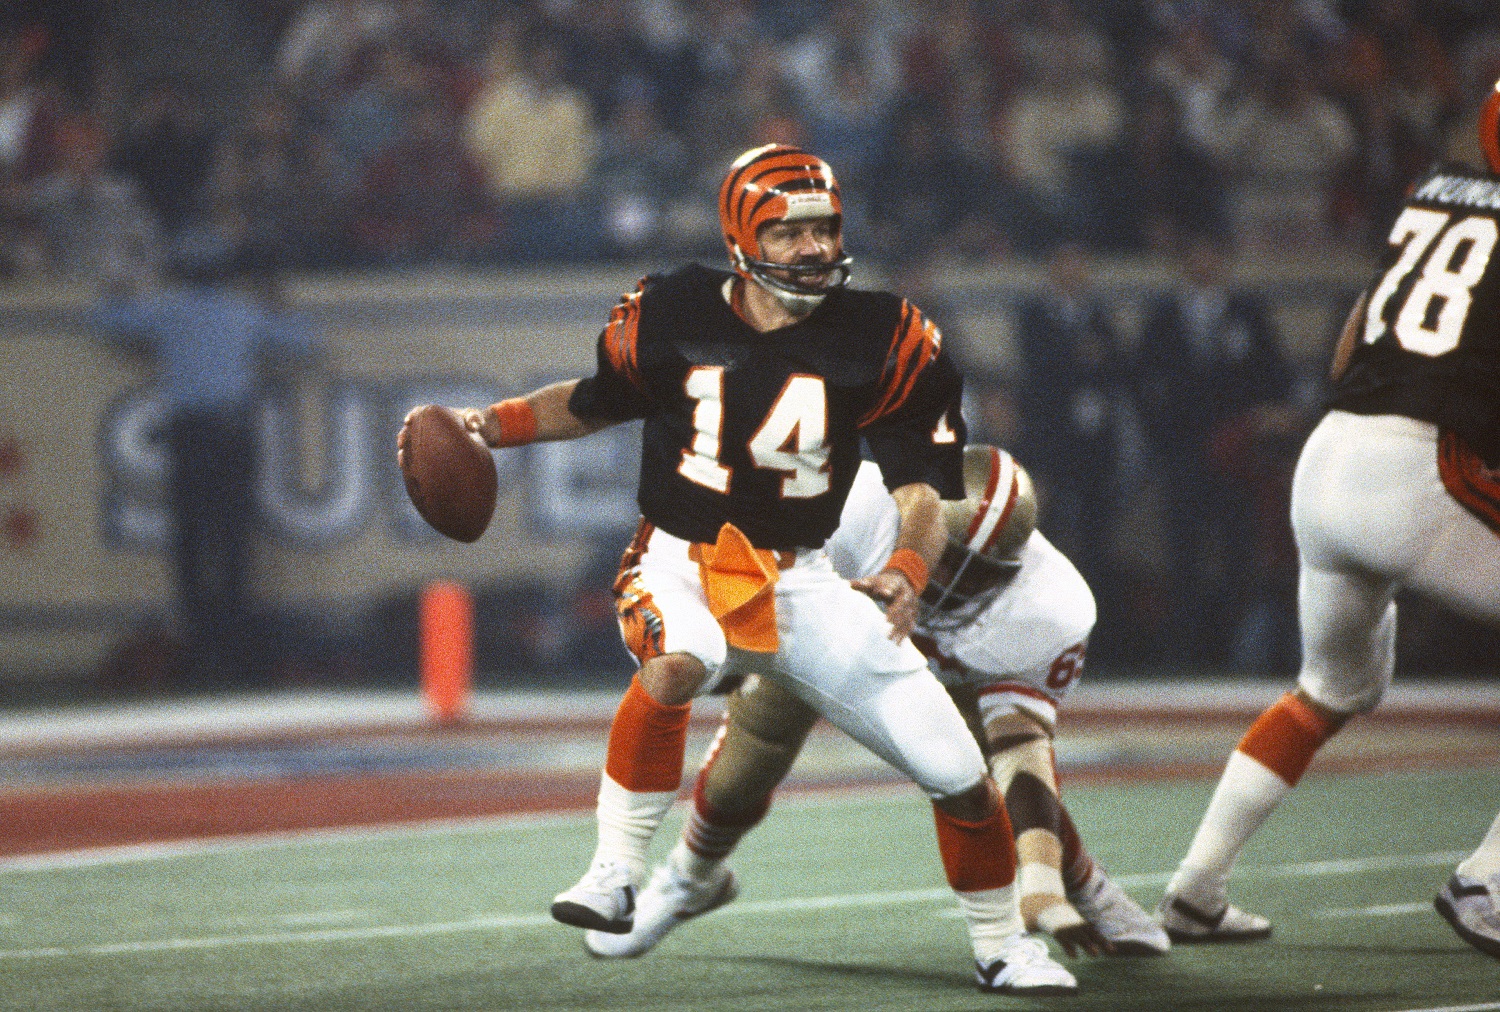 Ken Anderson led the Cincinnati Bengals to an appearance in Super Bowl 16 against the San Francisco 49ers. Anderson's body of work was the proof of concept that allowed Bill Walsh to succeed with Pro Football Hall of Fame QB Joe Montana running the 49ers' West Coast offense. | Focus on Sport/Getty Images